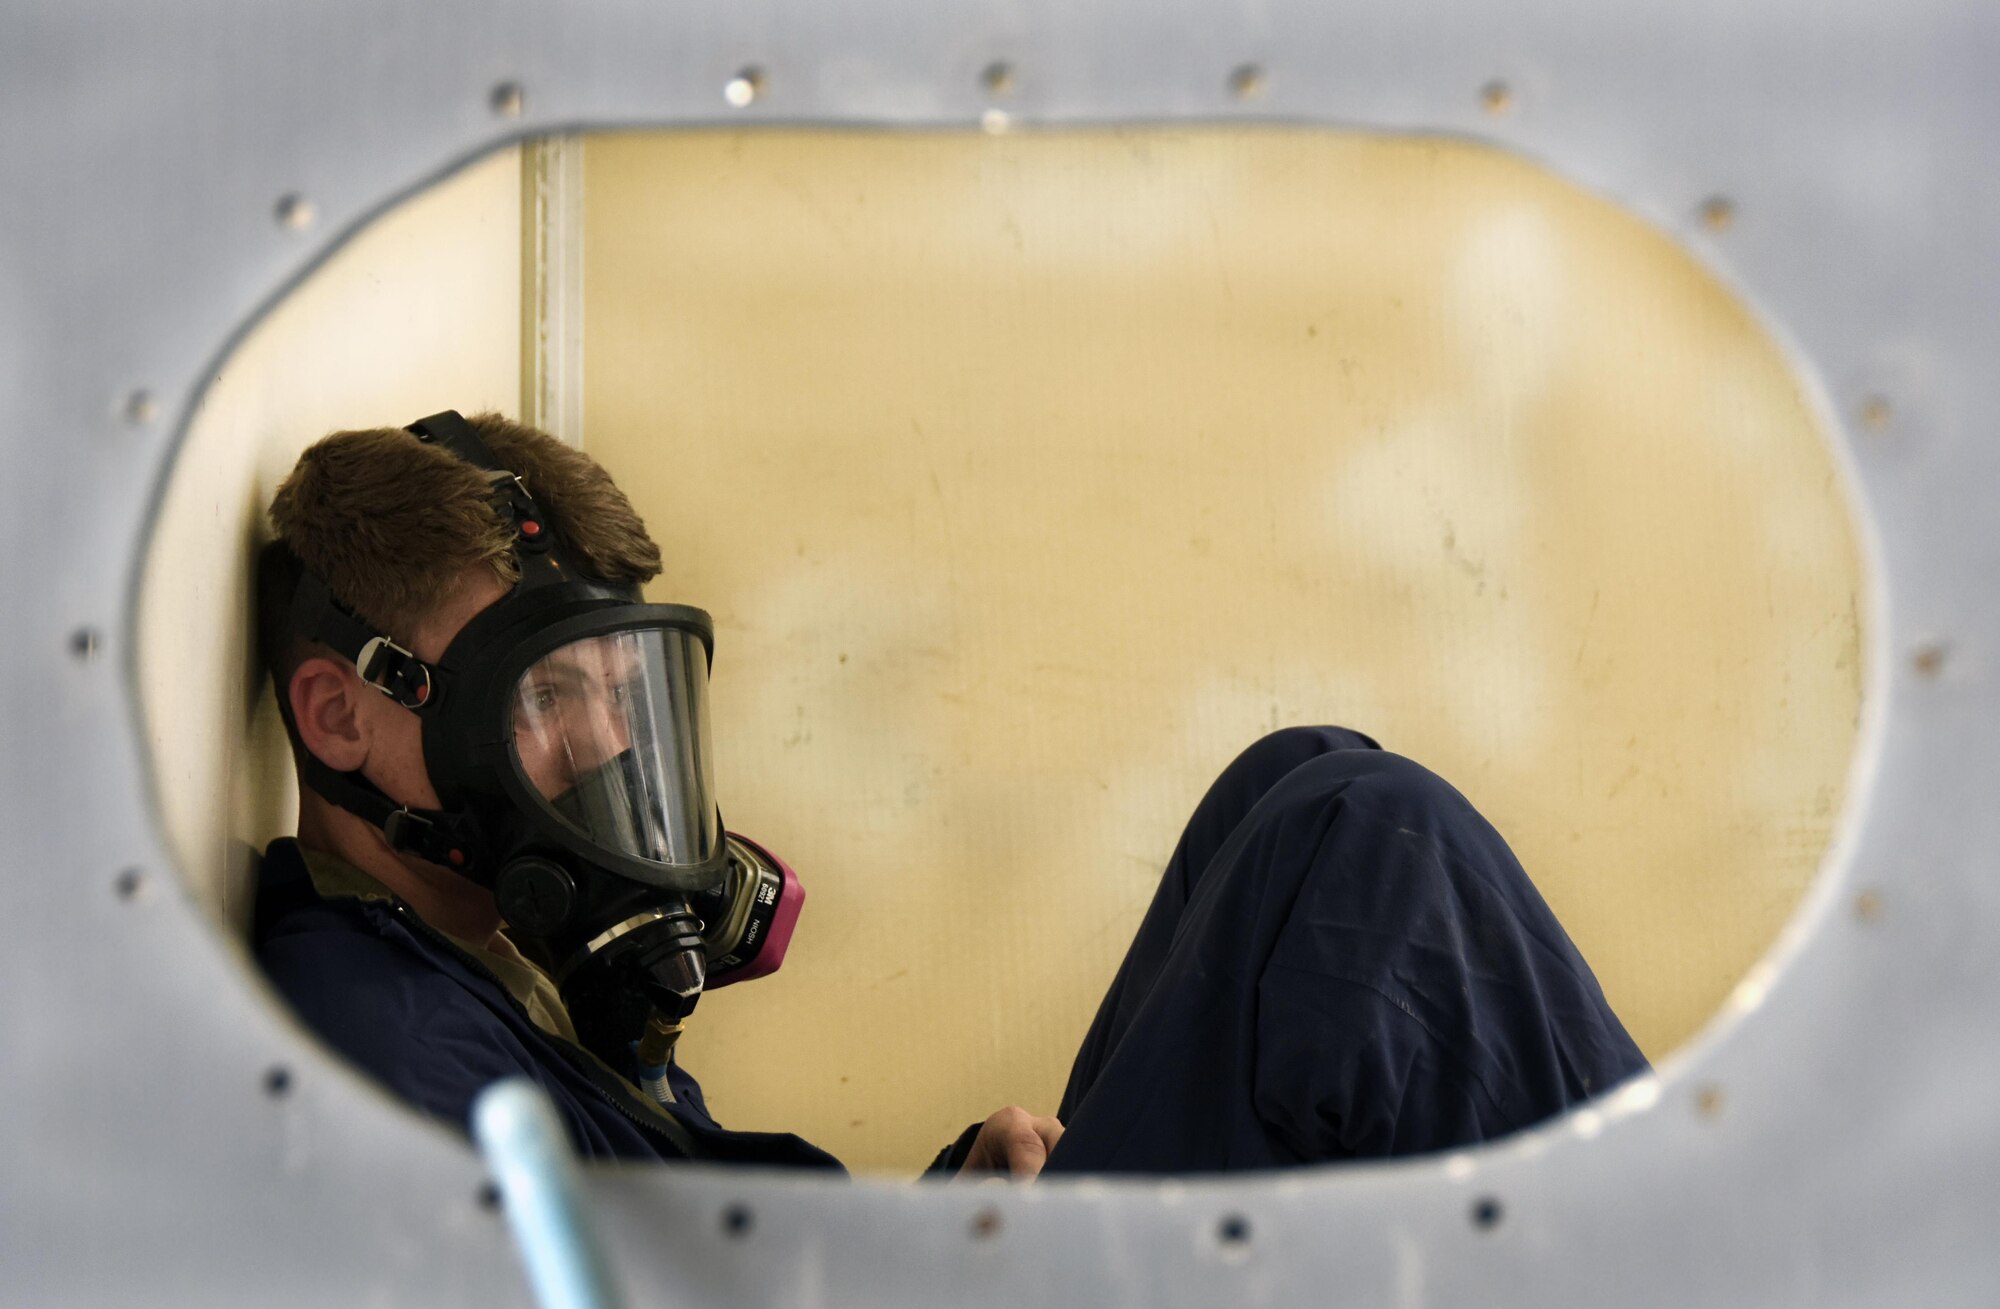 U.S. Air Force Senior Airman Justin Abel, an aircraft fuel systems repair technician with the 379th Expeditionary Maintenance Squadron, role-plays being trapped in a mock fuel cell during a confined space training exercise at Al Udeid Air Base, Qatar, April 14, 2017. This type of training is paramount for these Airmen because of the risks associated with the conditions they may have to work in. (U.S. Air Force photo by Senior Airman Cynthia A. Innocenti)